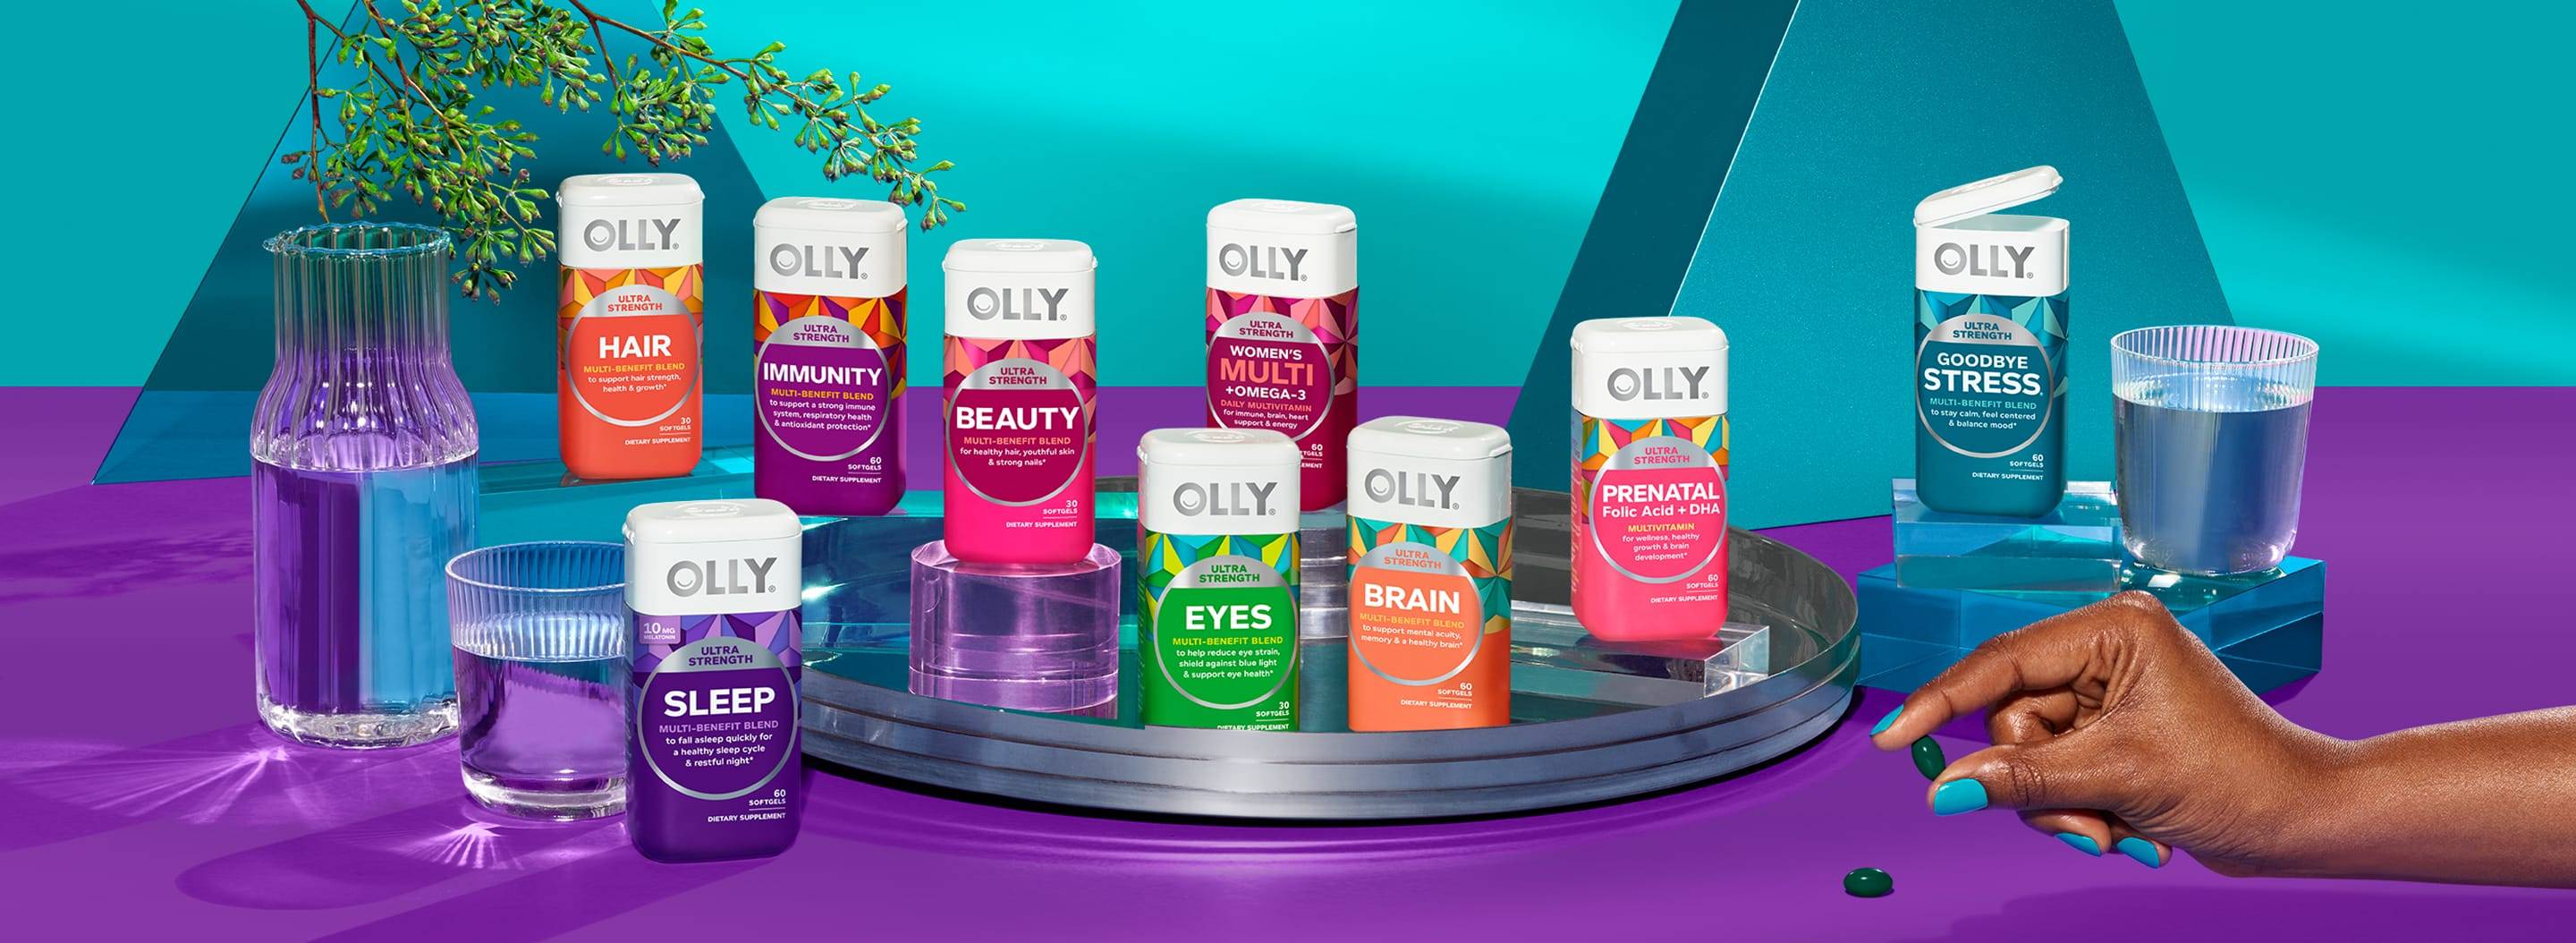 Olly Ultra Strength Softgel Products